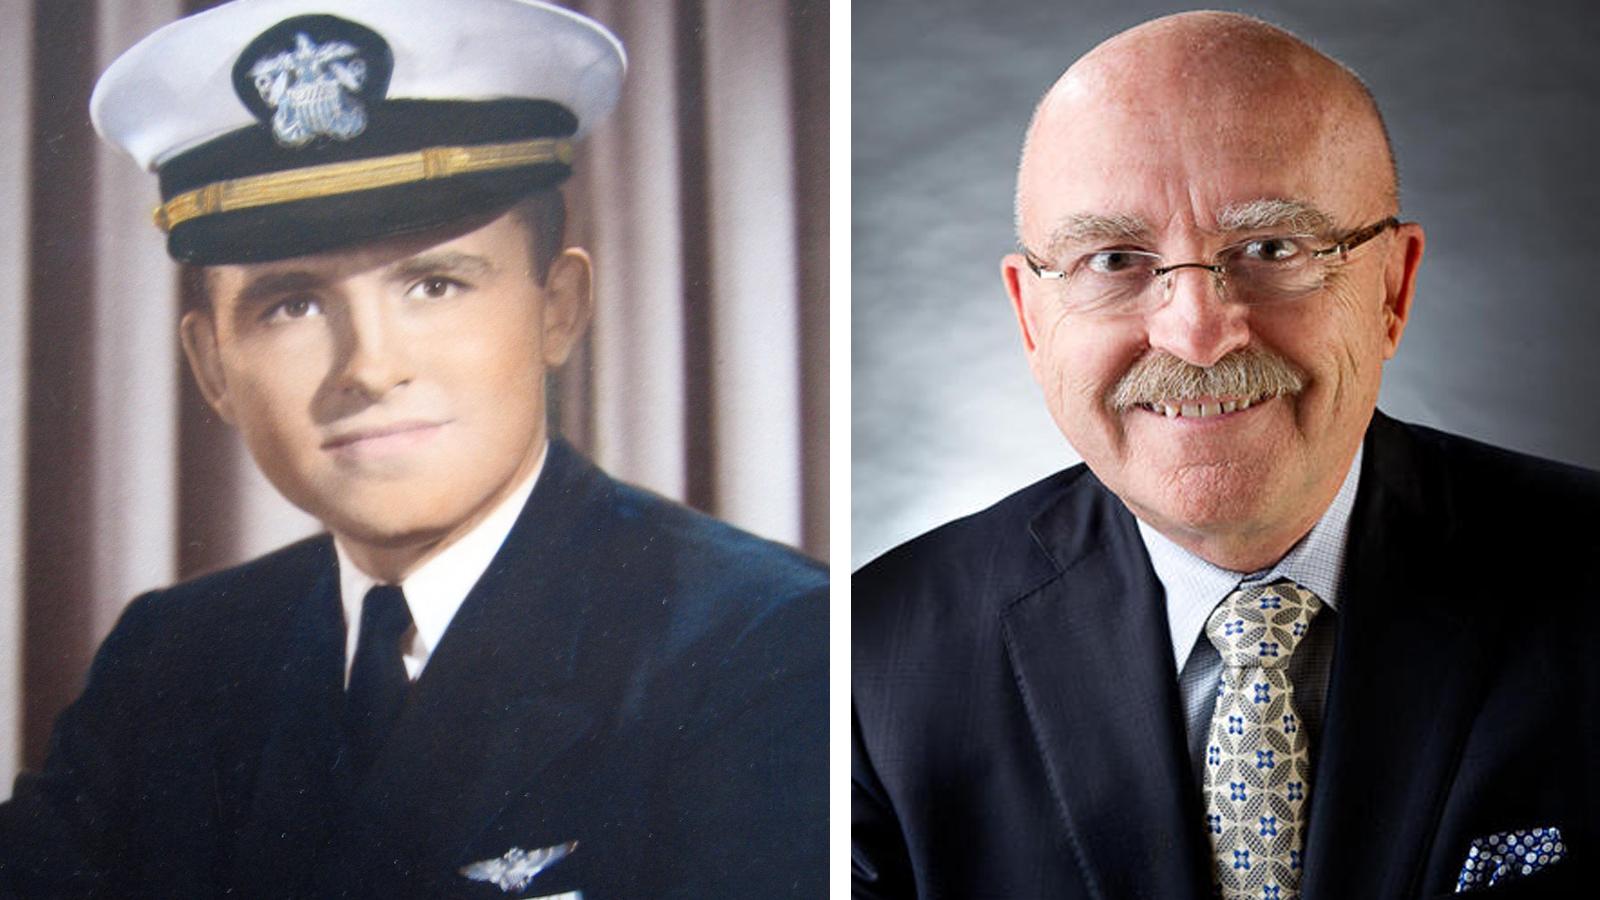 Donald Quest in the 1960s in his Navy uniform (left photo) and today in suit and tie (right photo)